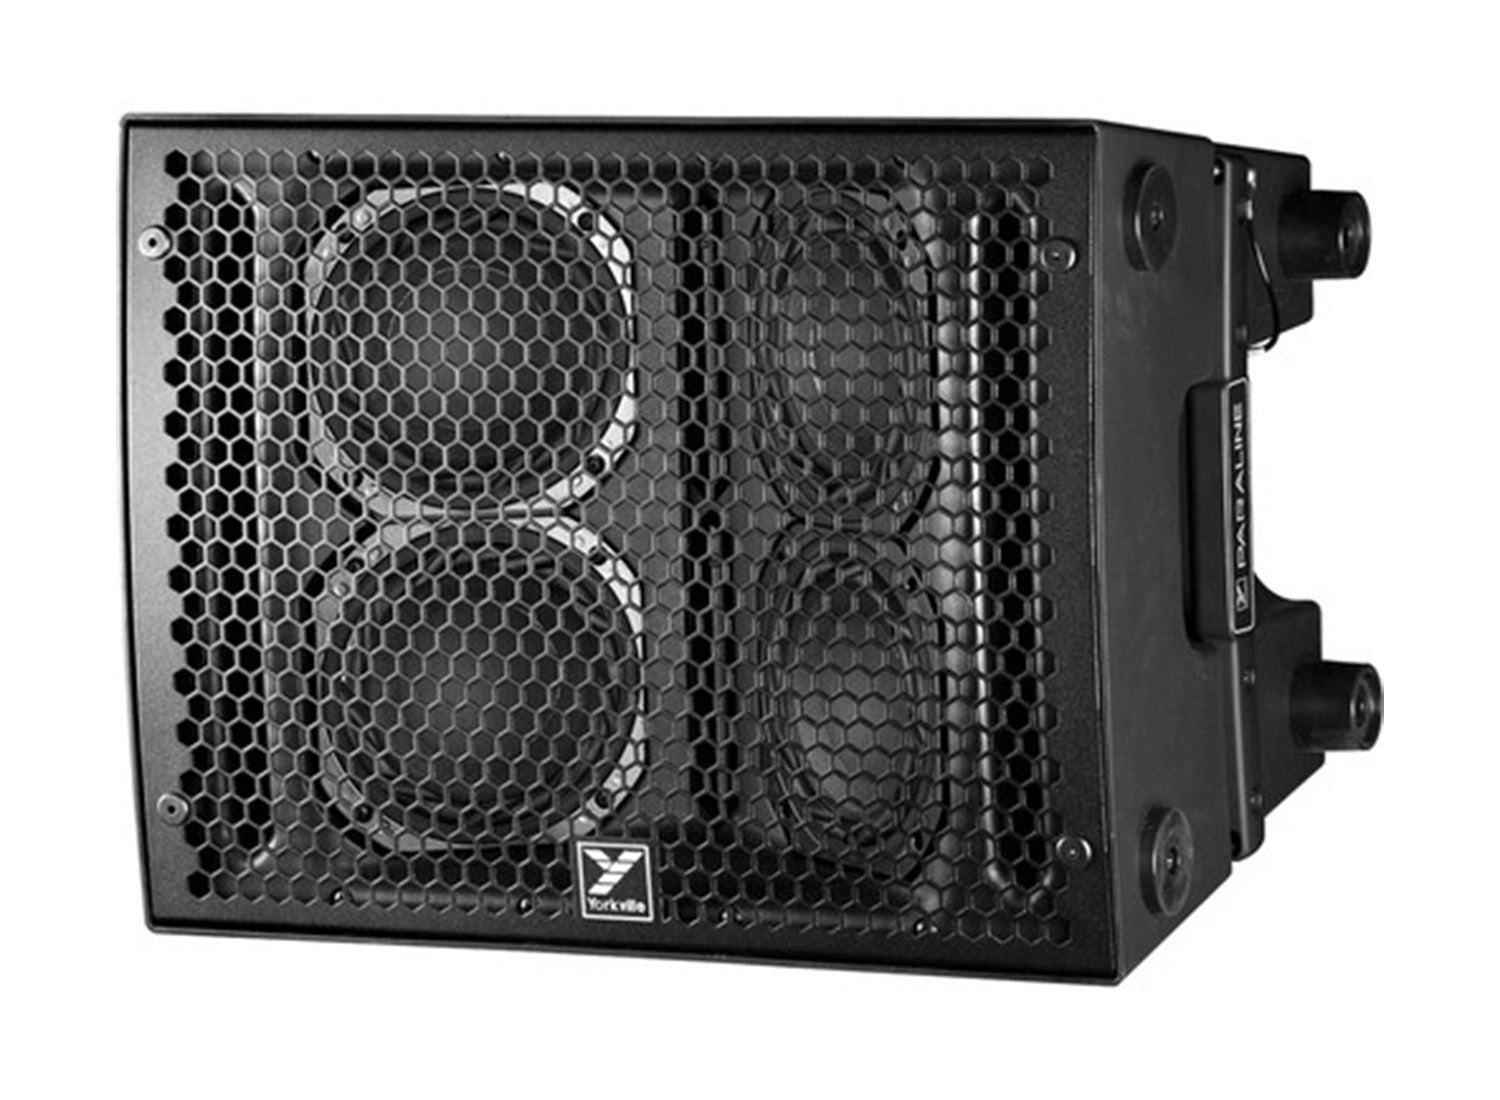 B-Stock: Yorkville Sound PSA1, Paraline Series Loudspeaker System with Active Full Range - 700W by Yorkville